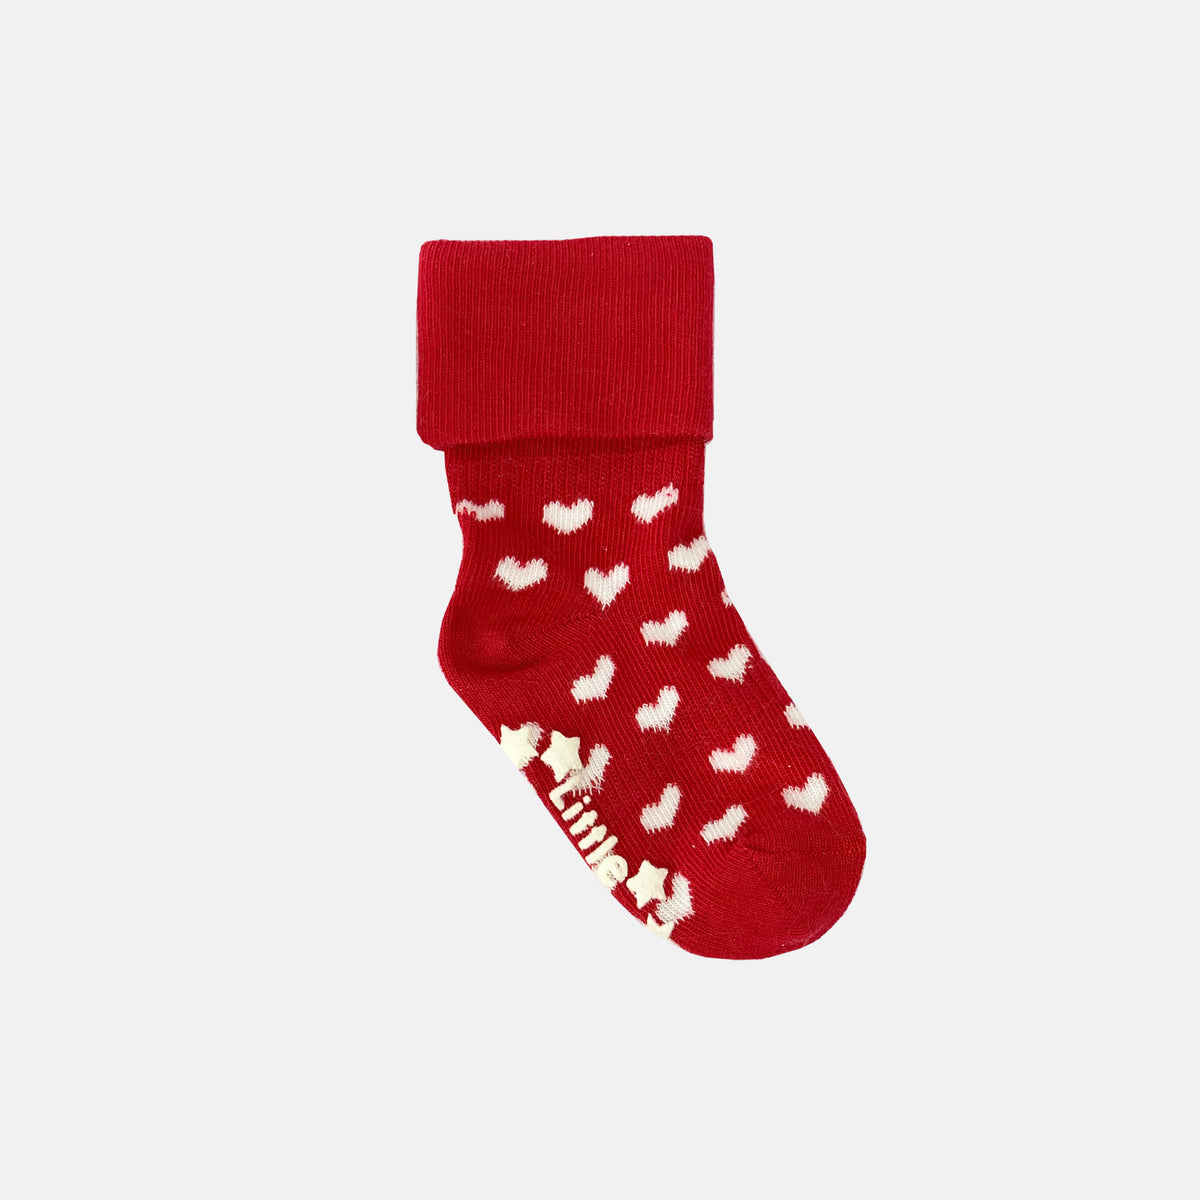 Child's Mini Me Matching Socks in Red Hearts